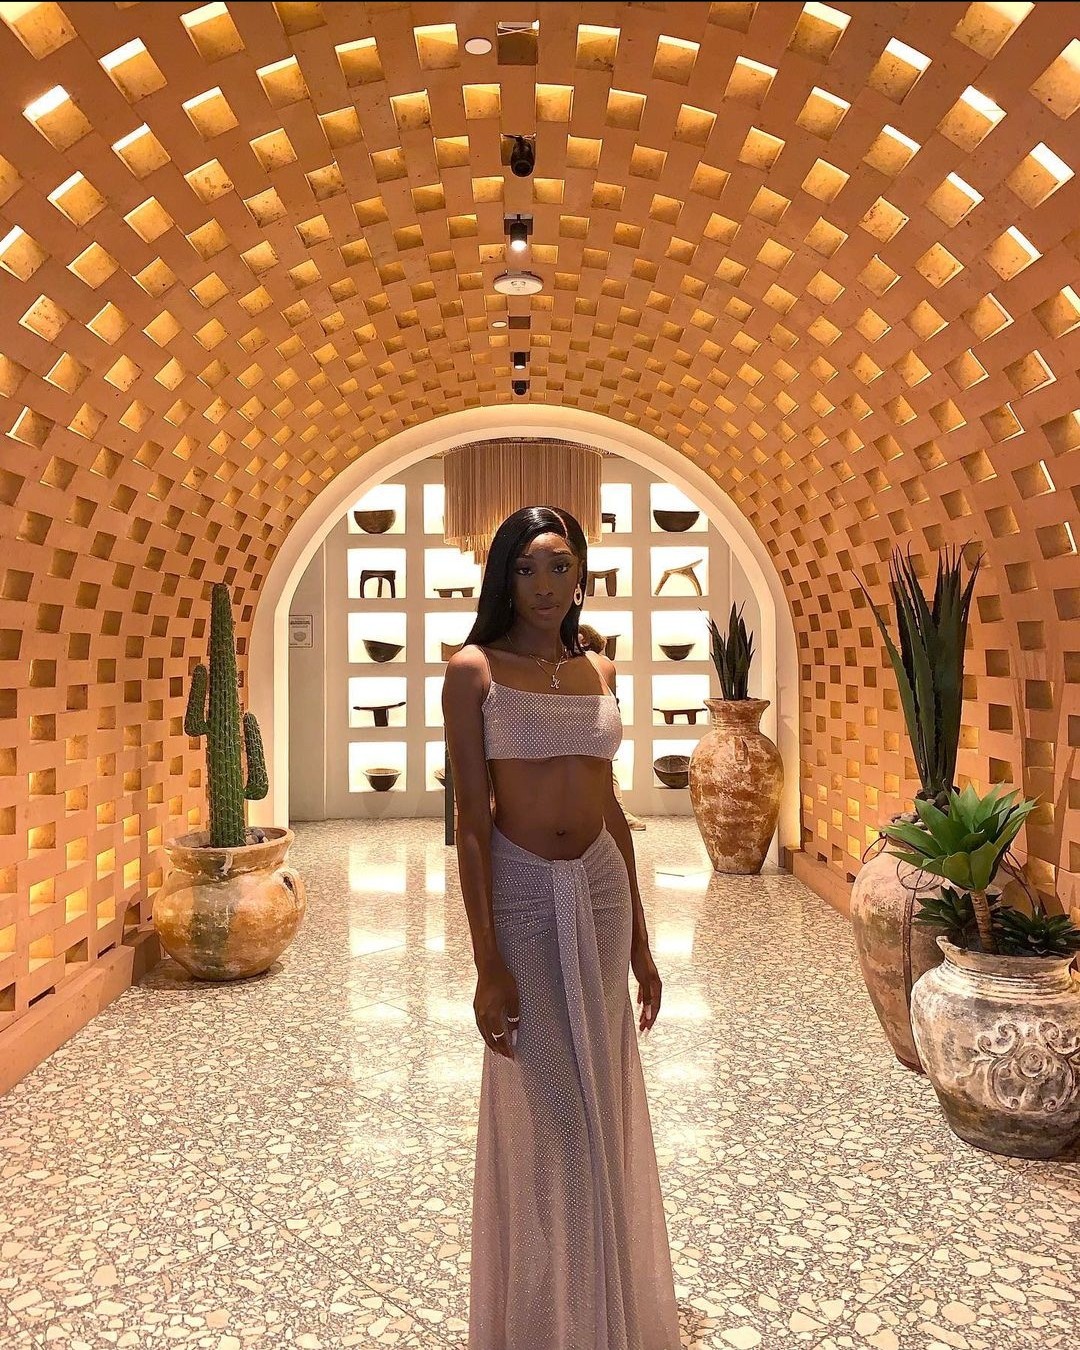 A woman in white dress standing inside of an indoor area.